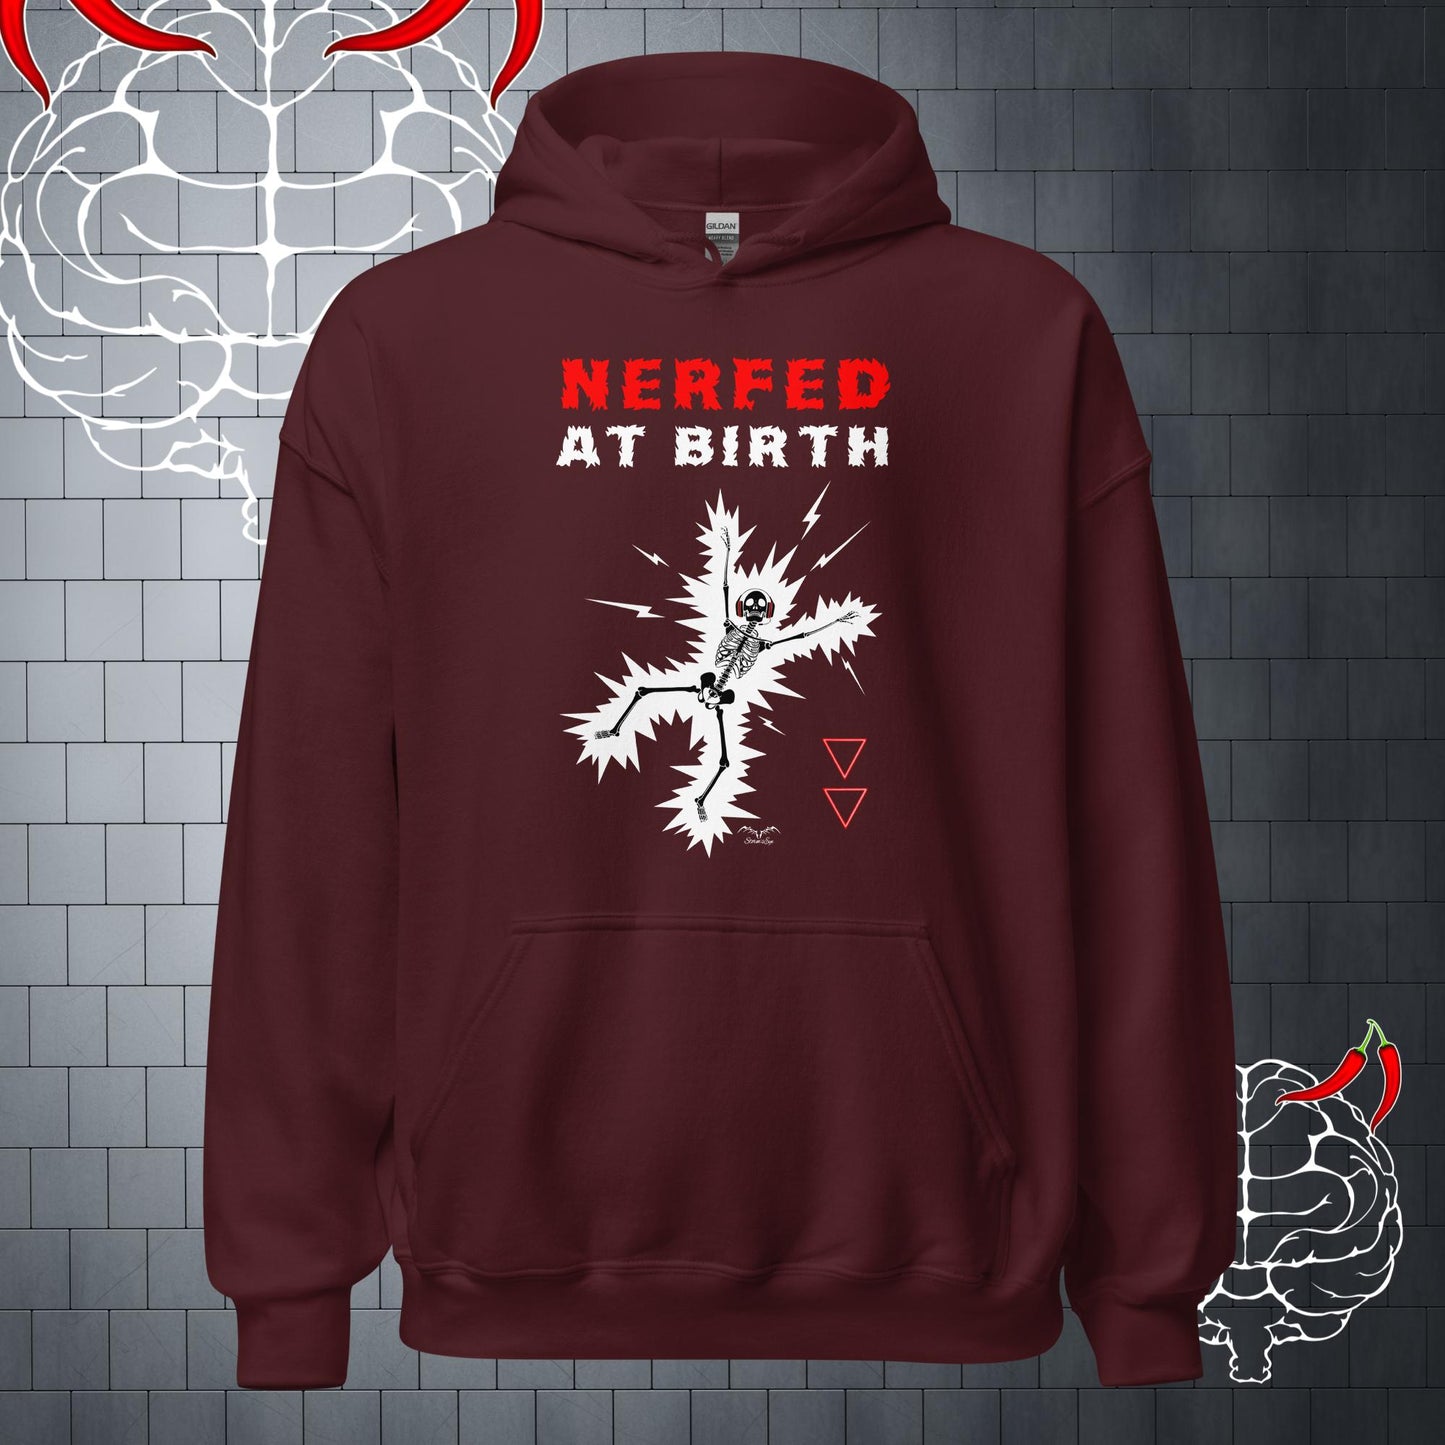 funny nerfed at birth gamer Hoodie, wine red by Stormseye Design